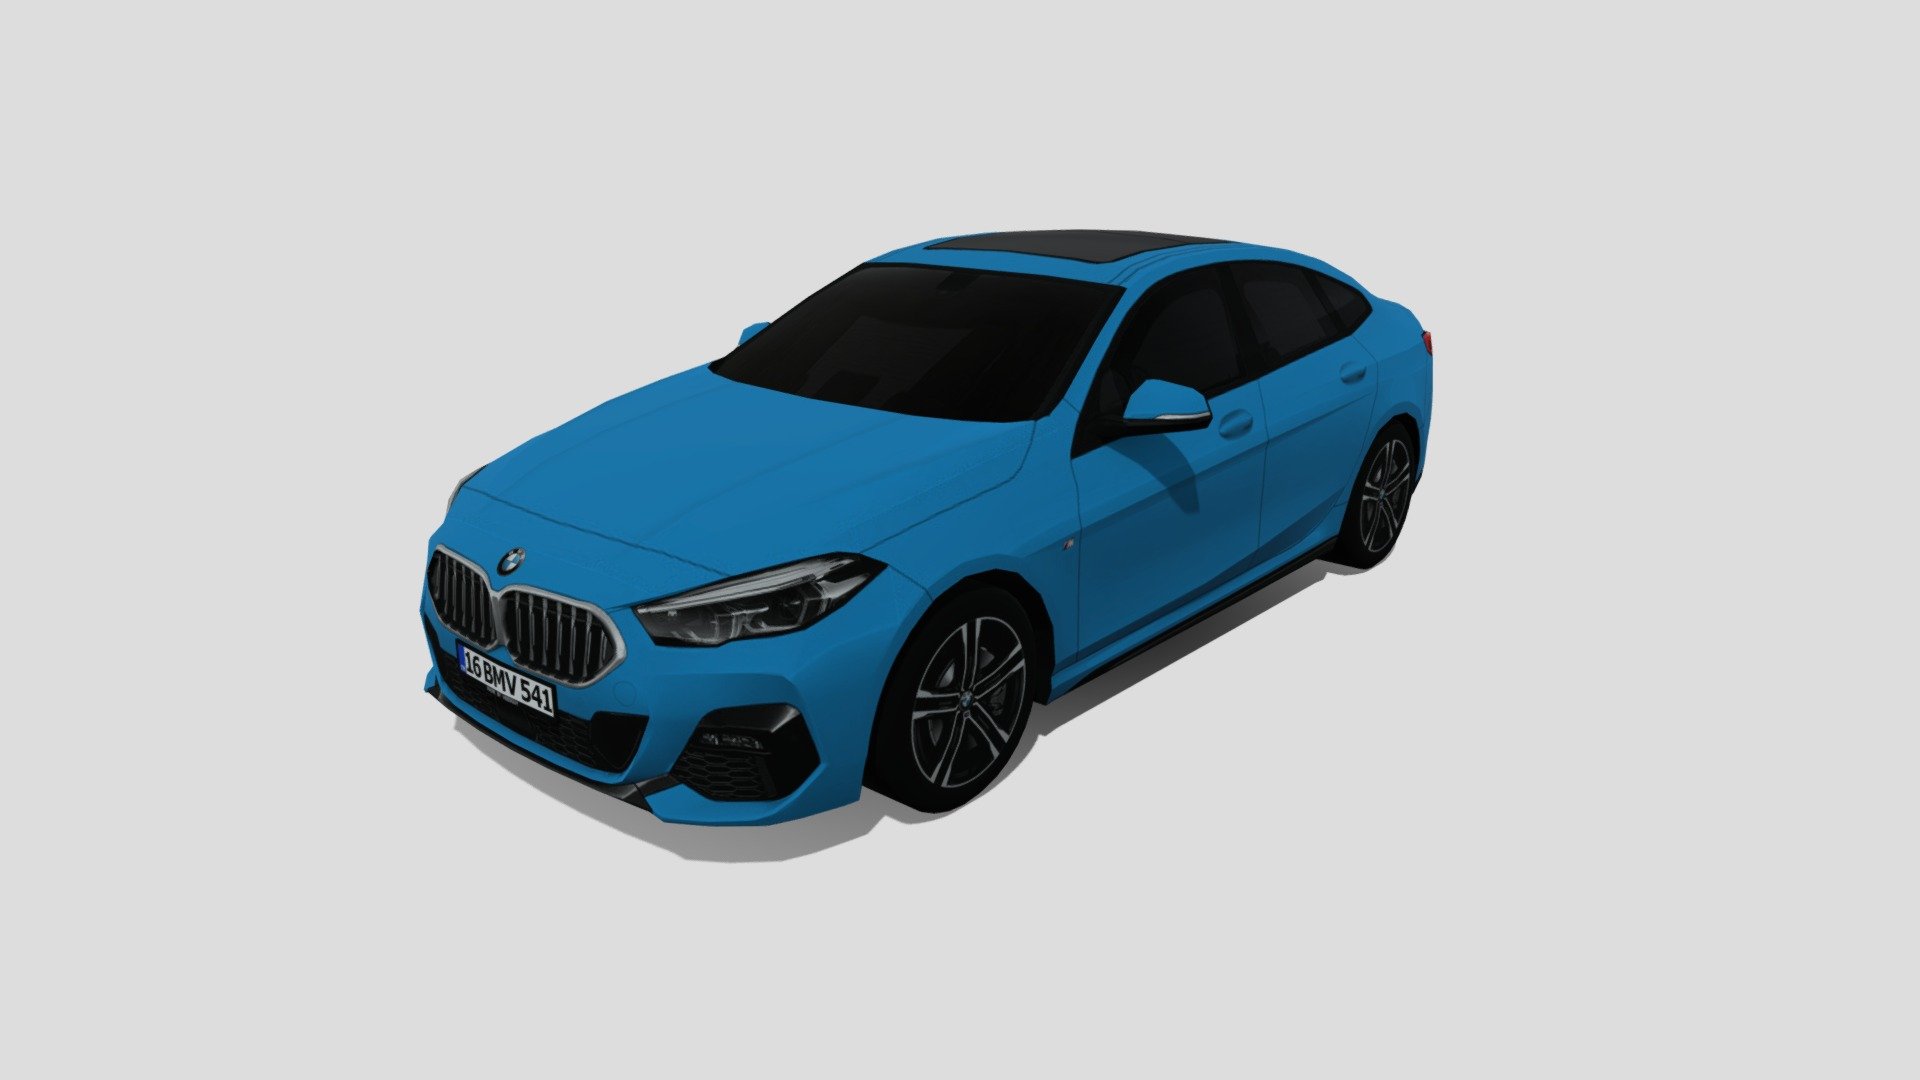 2023 BMW 2 Gran Coupe by VeesGuy

Tris: 3830
Texture: 1024x1024 - 2023 BMW 2 Gran Coupe - 3D model by VeesGuy 3d model